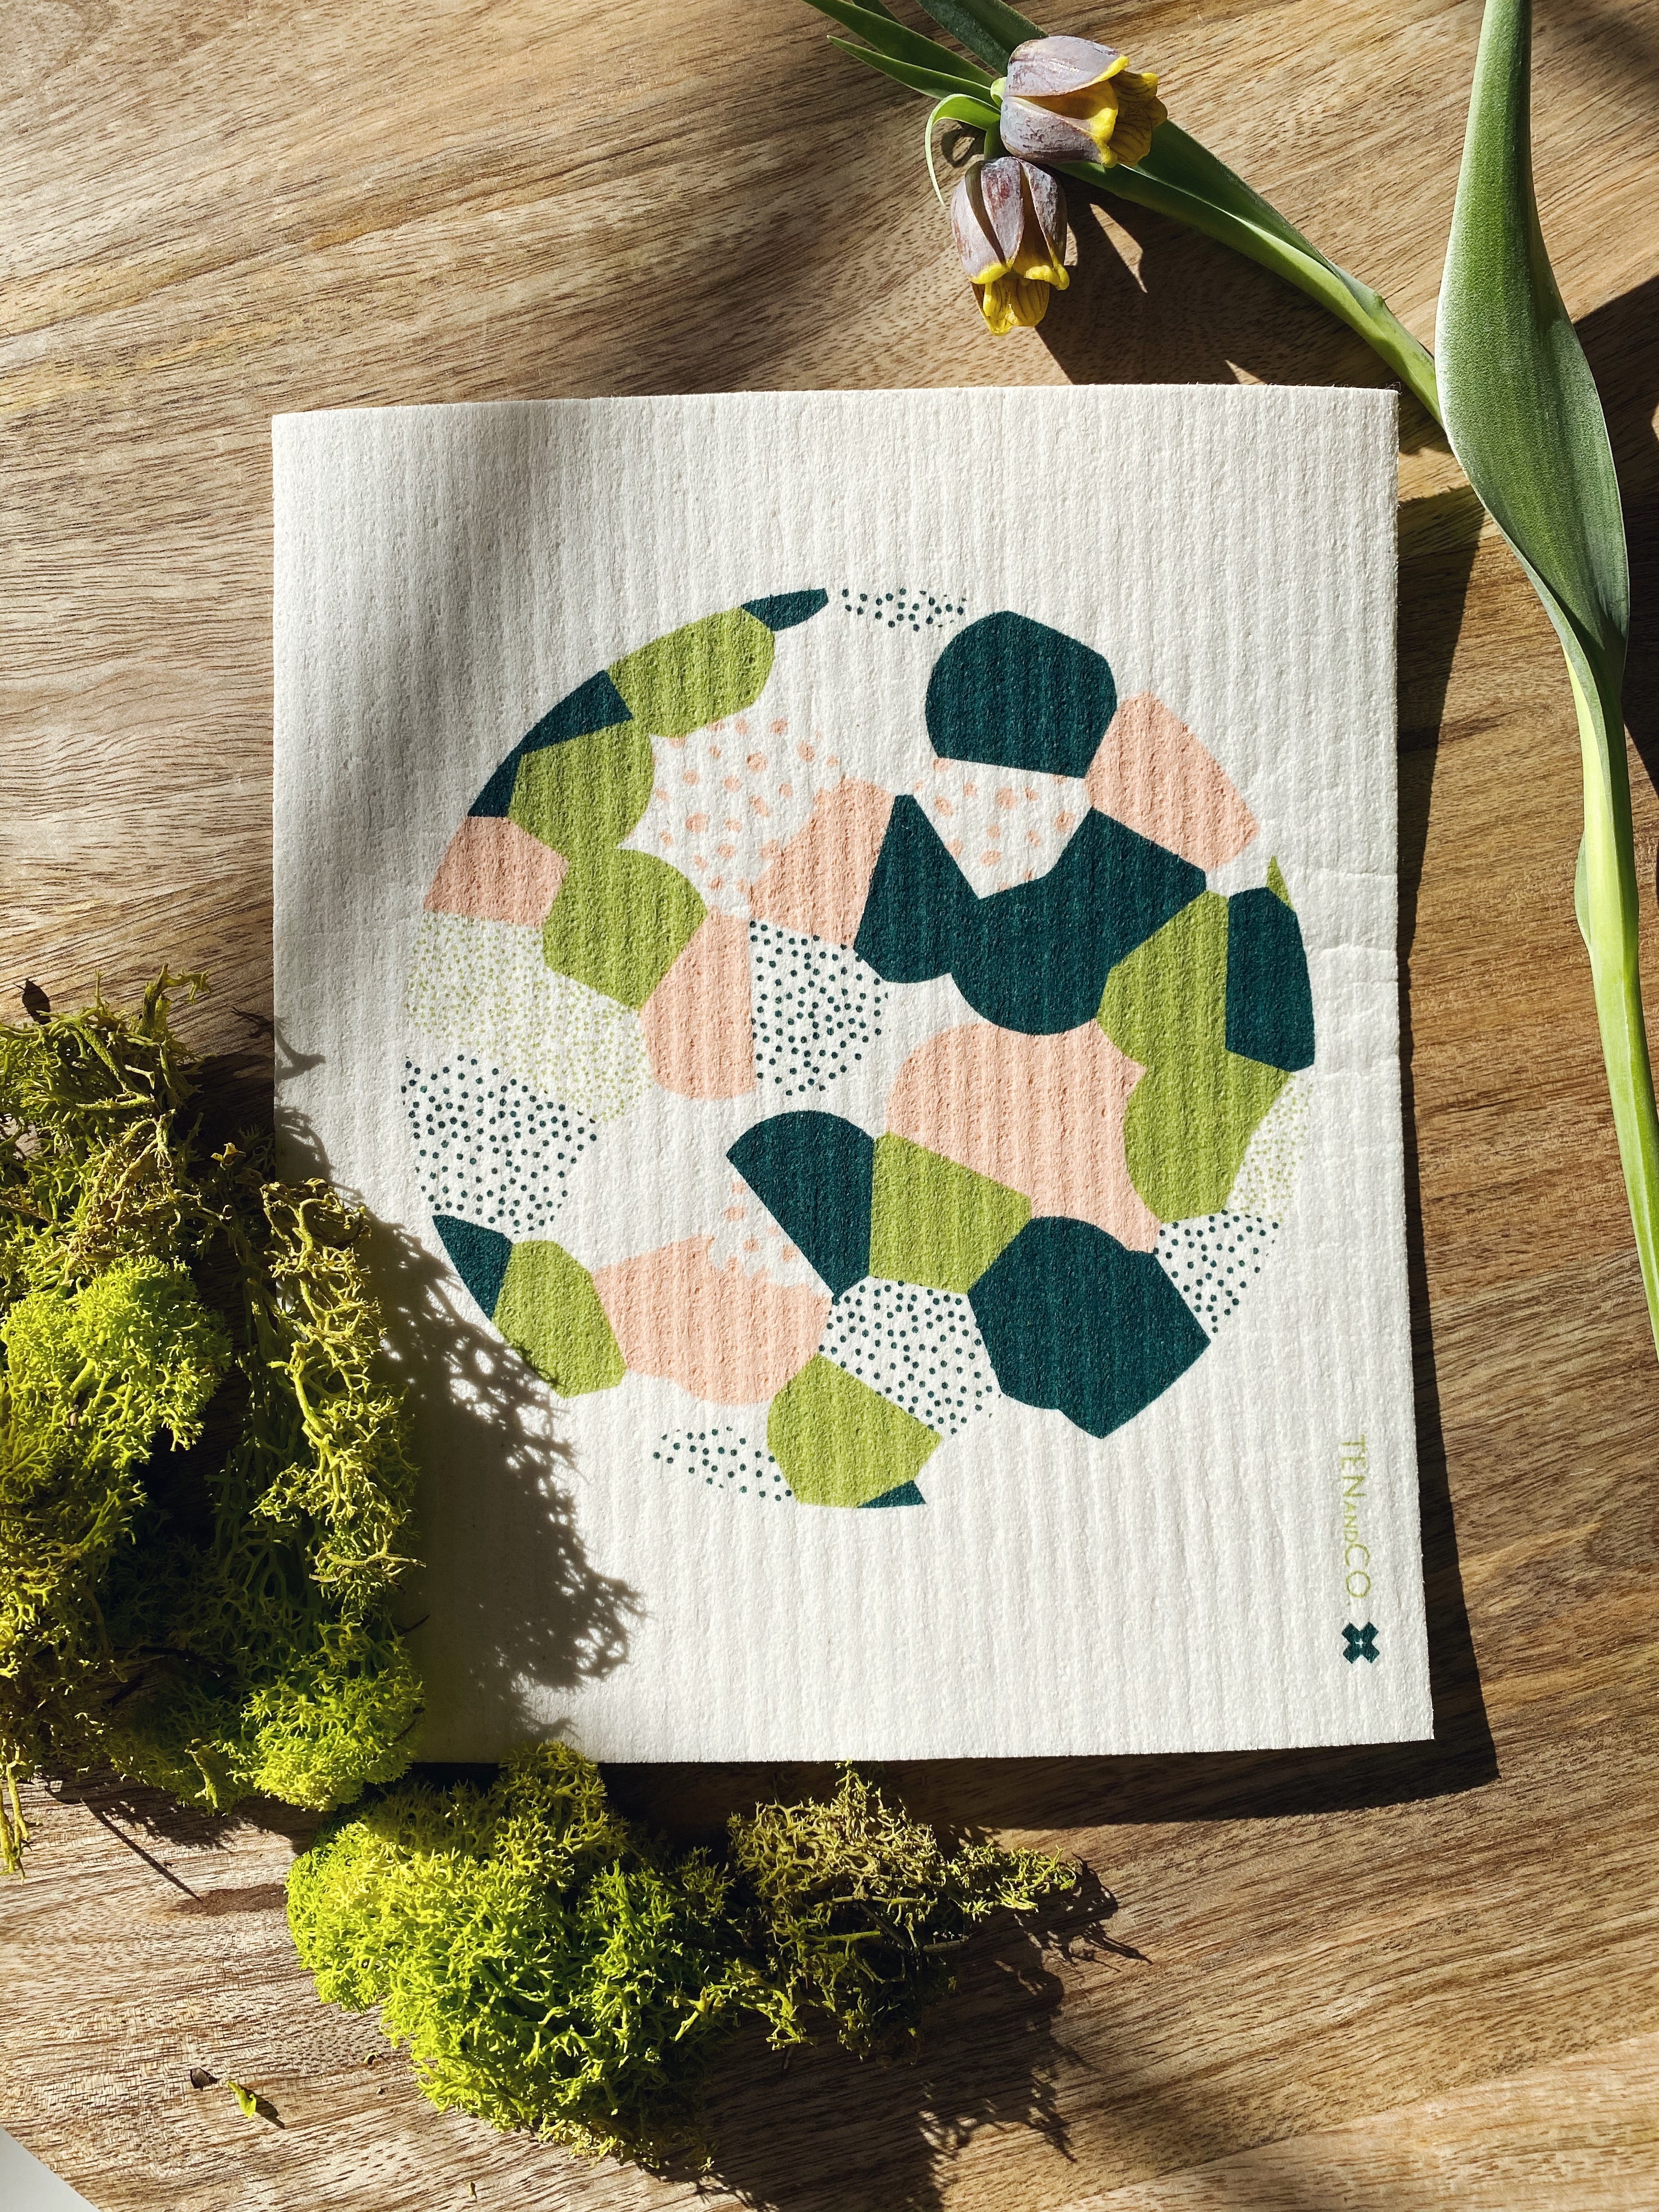 Product image of Full Circle Sponge cloth. The sponge cloth is laying on a wood surface. There is sunlight shining on it. It is surrounded by a couple ferns and plants.  